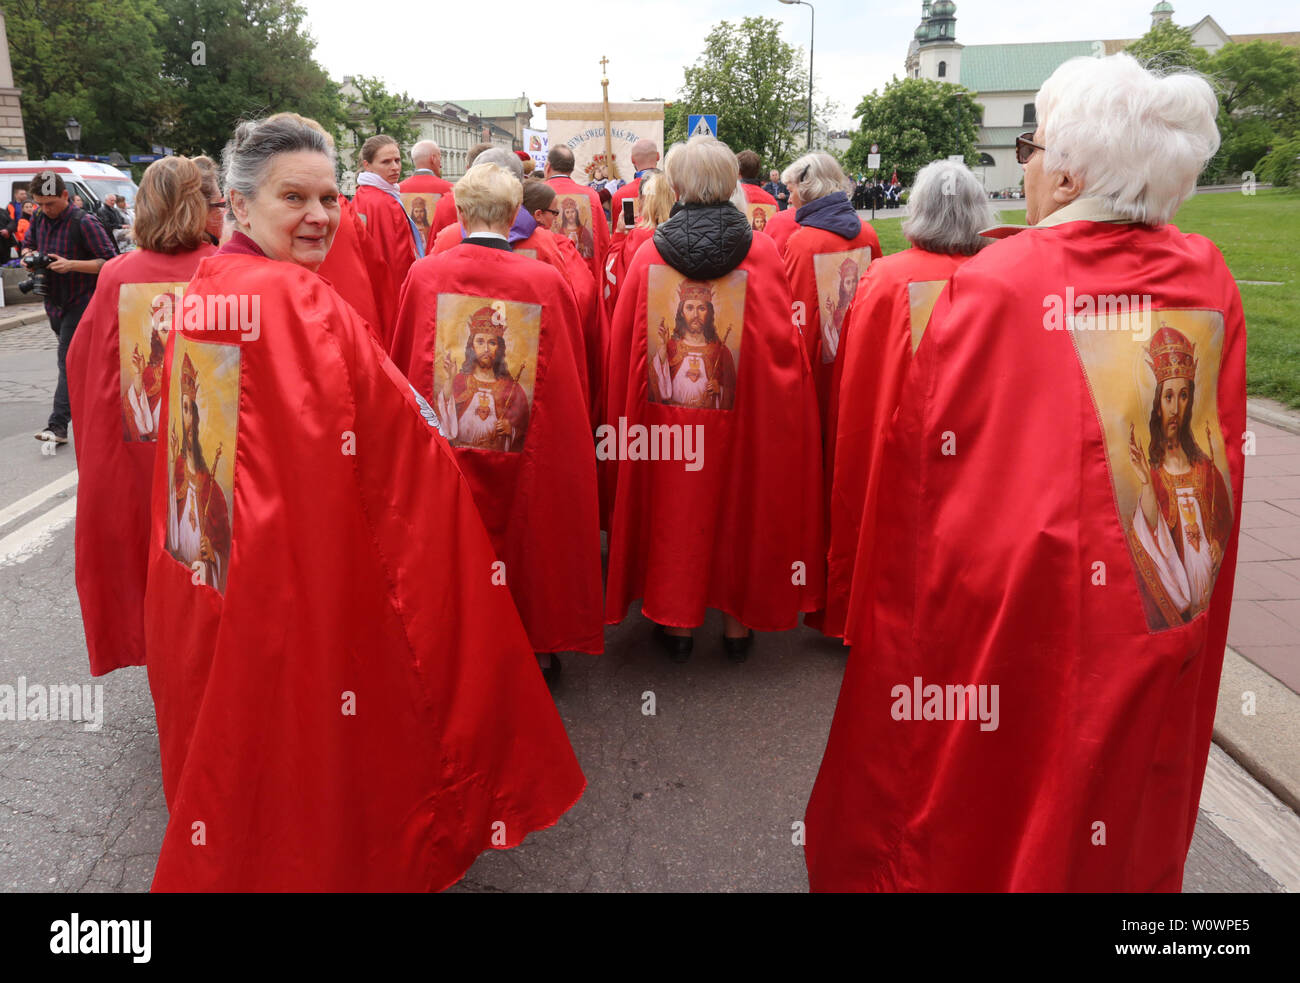 Krakow. Cracow. Poland. St. Stanislaw procession from Wawel Royal Castle to Skalka Church. Members of the Jesus the King of Poland brotherhood. Stock Photo